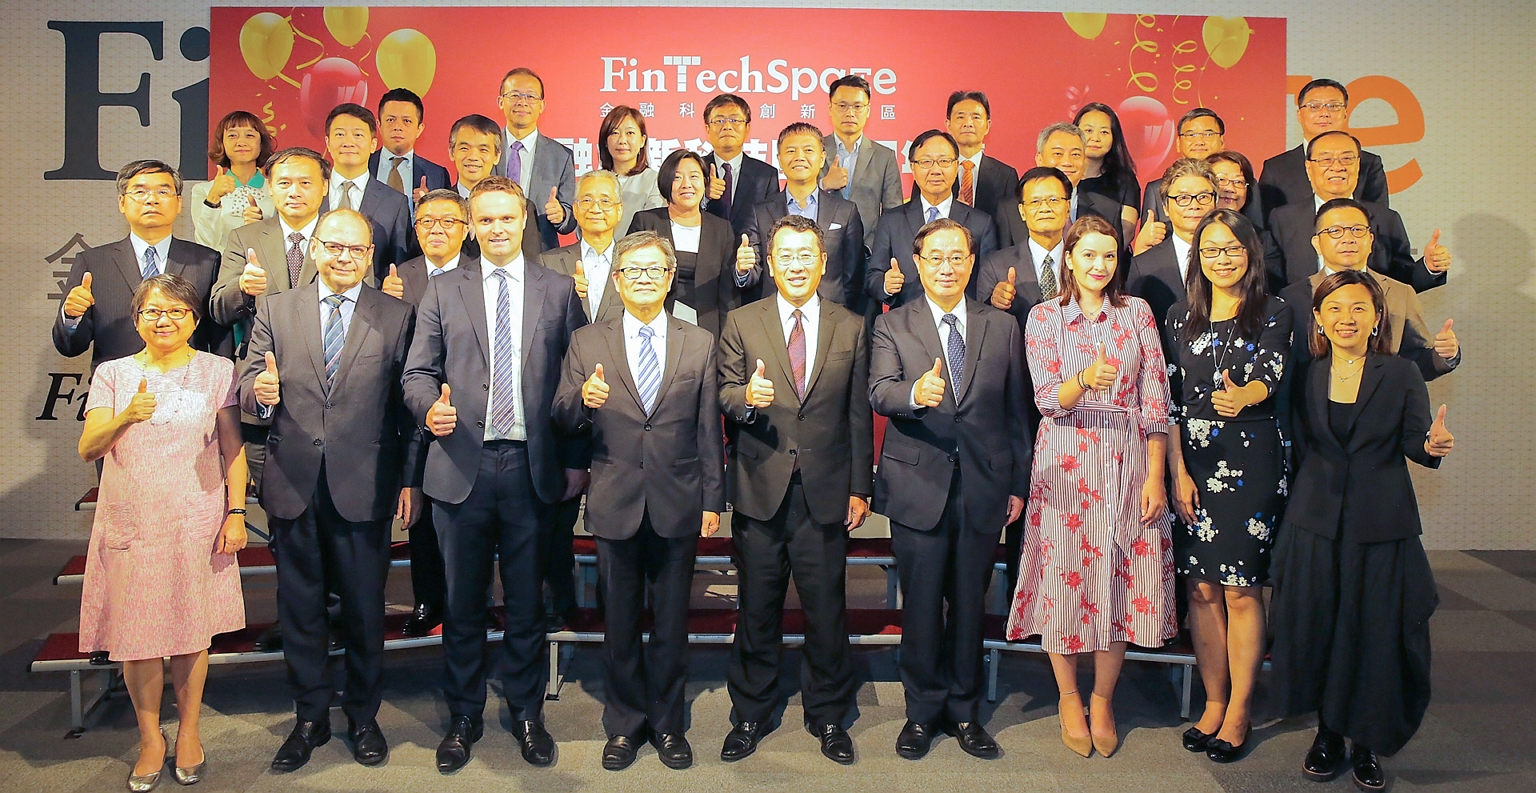 The FinTechSpace (the FSC instructed FinTech Incubator) celebrated its anniversary on September 18, 2019, and the “1st Anniversary Celebration and Meet the Chairman” event was held on September 16, 2019 at the facility. Former Chairman Koo was invited to deliver a speech and to witness the accomplishment achieved by FinTechSpace supported teams.